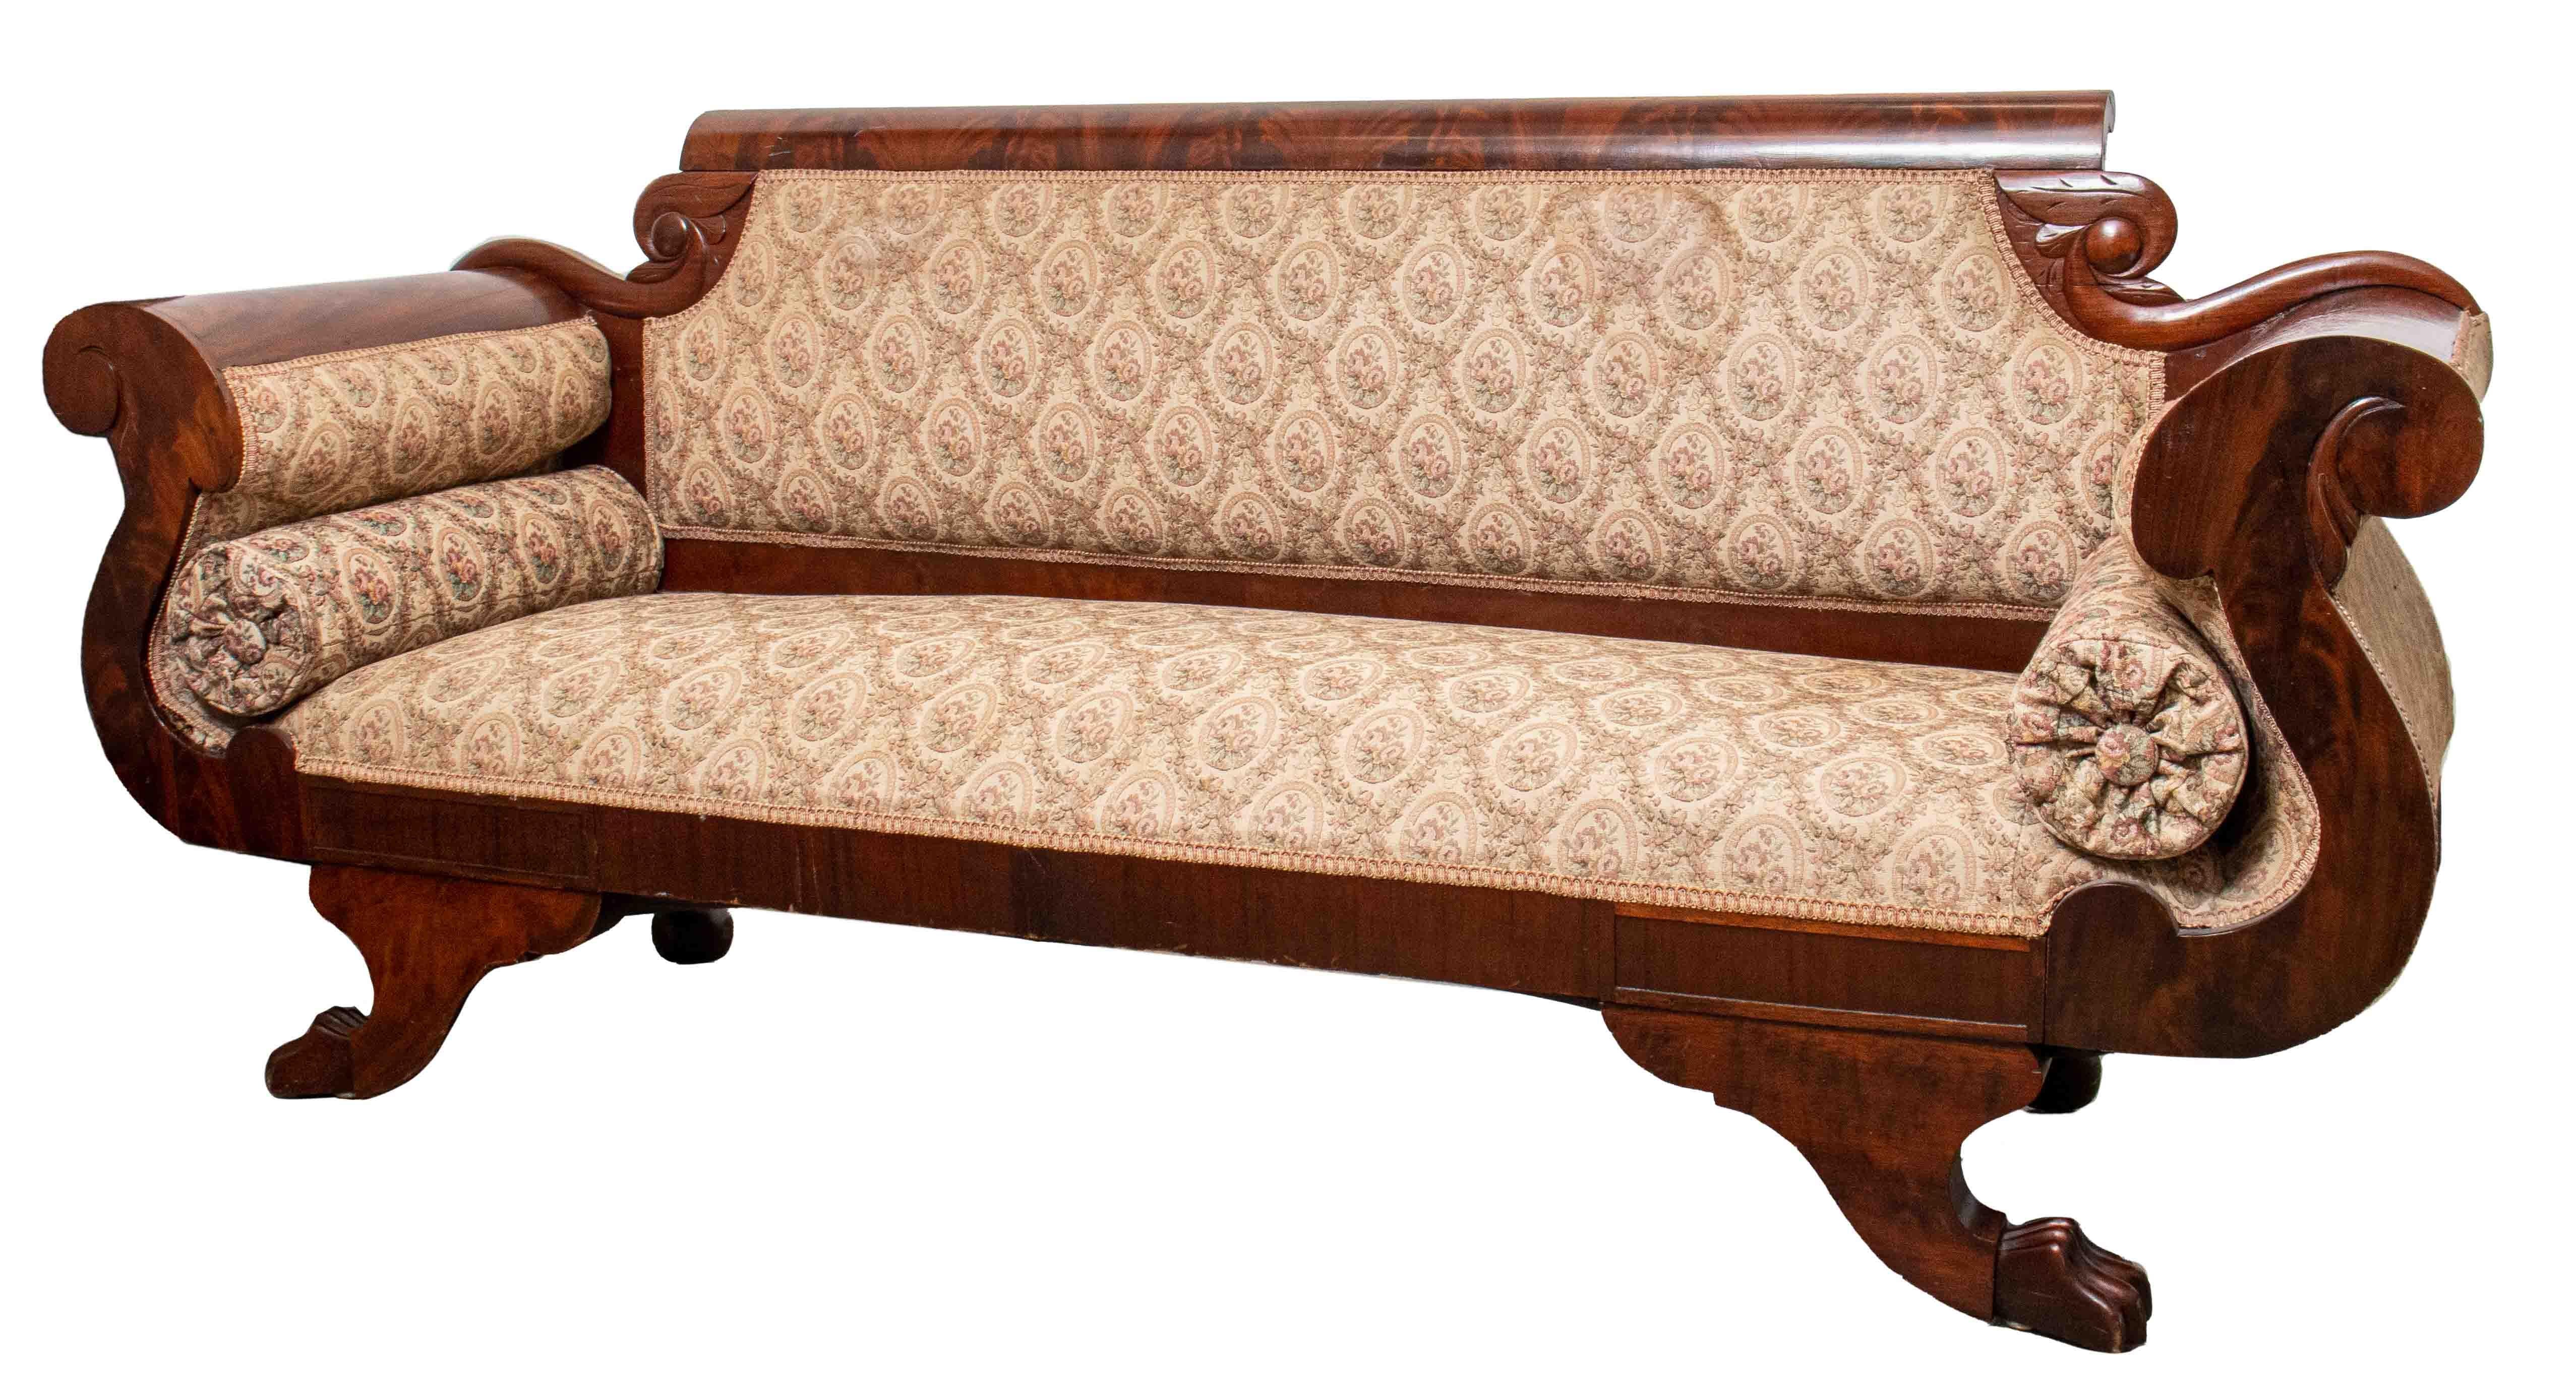 Biedermeier sofa with curved arms and two claw feet, with cream and pink floral upholstery on the back, seat, and two cylindrical pillows. Seat height: 17